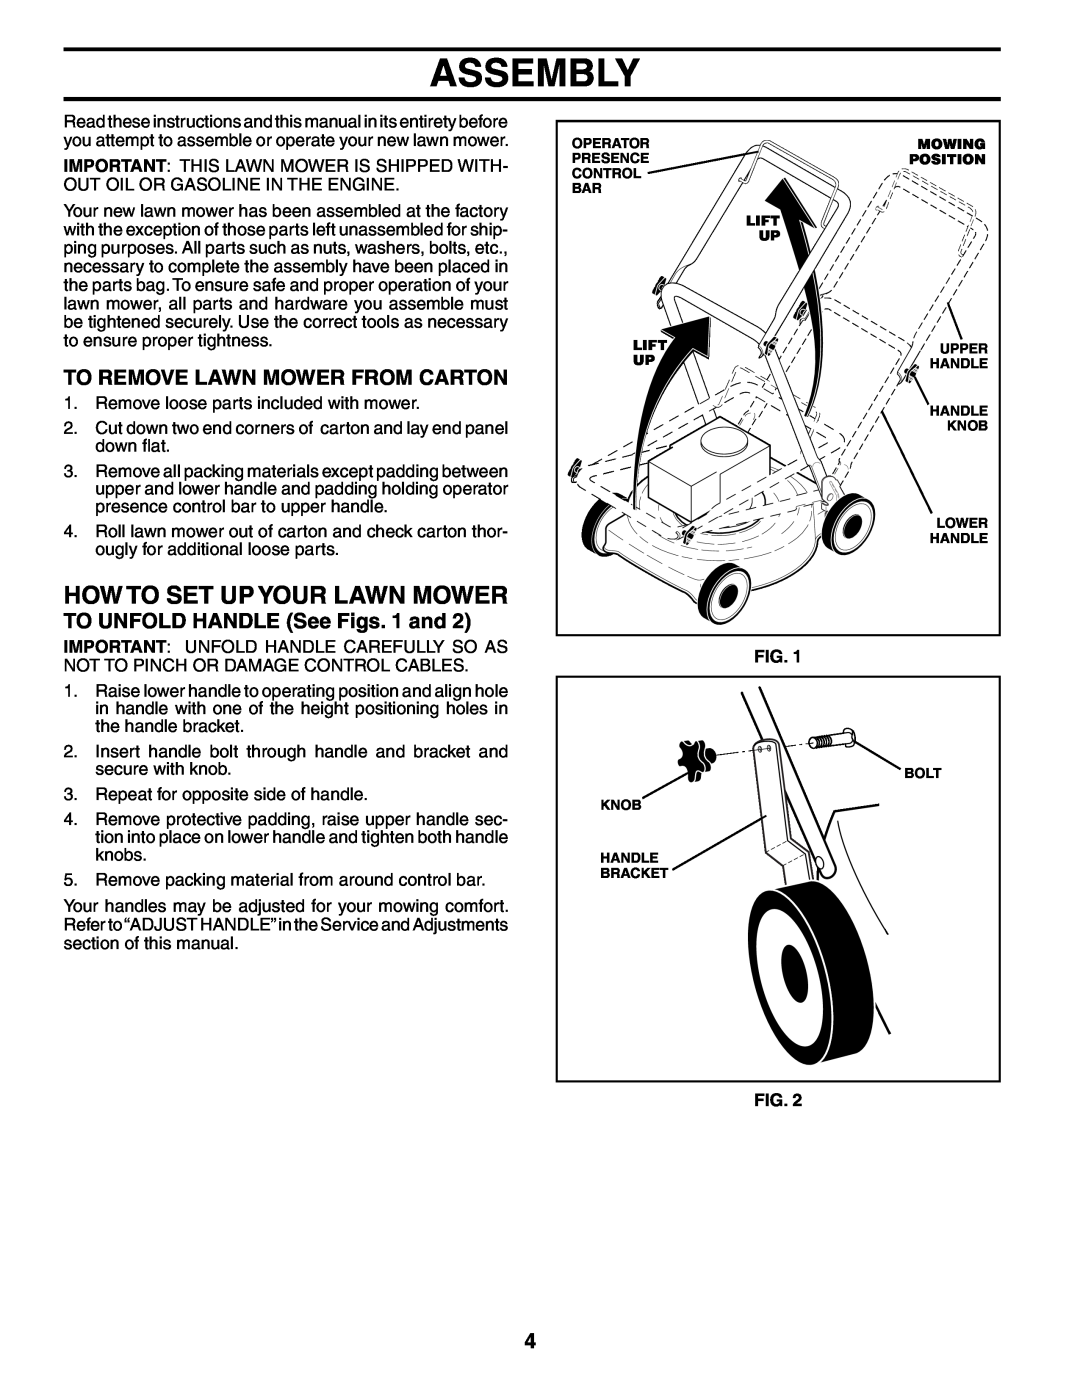 Husqvarna 67521 HV owner manual Assembly, How To Set Up Your Lawn Mower, To Remove Lawn Mower From Carton, Fig 